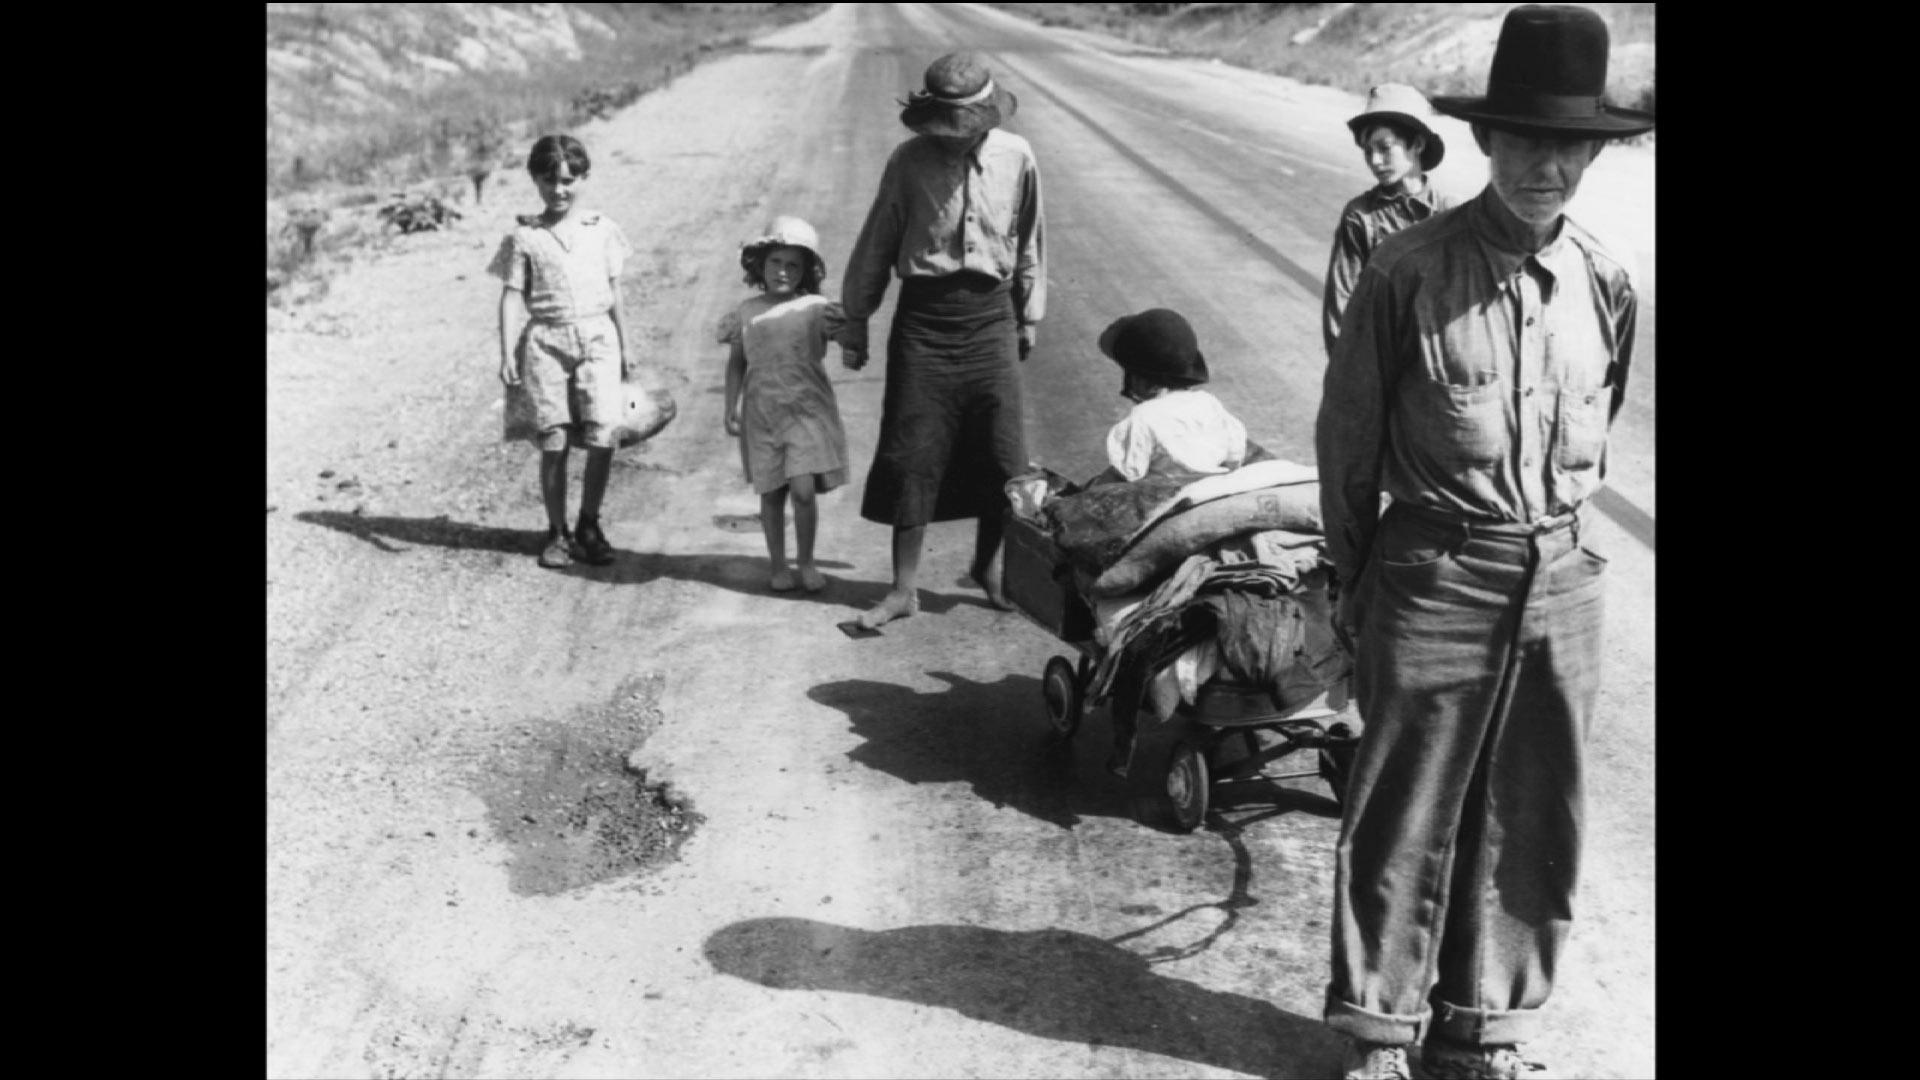 The Dust Bowl: Documenting the First Migrants to California American